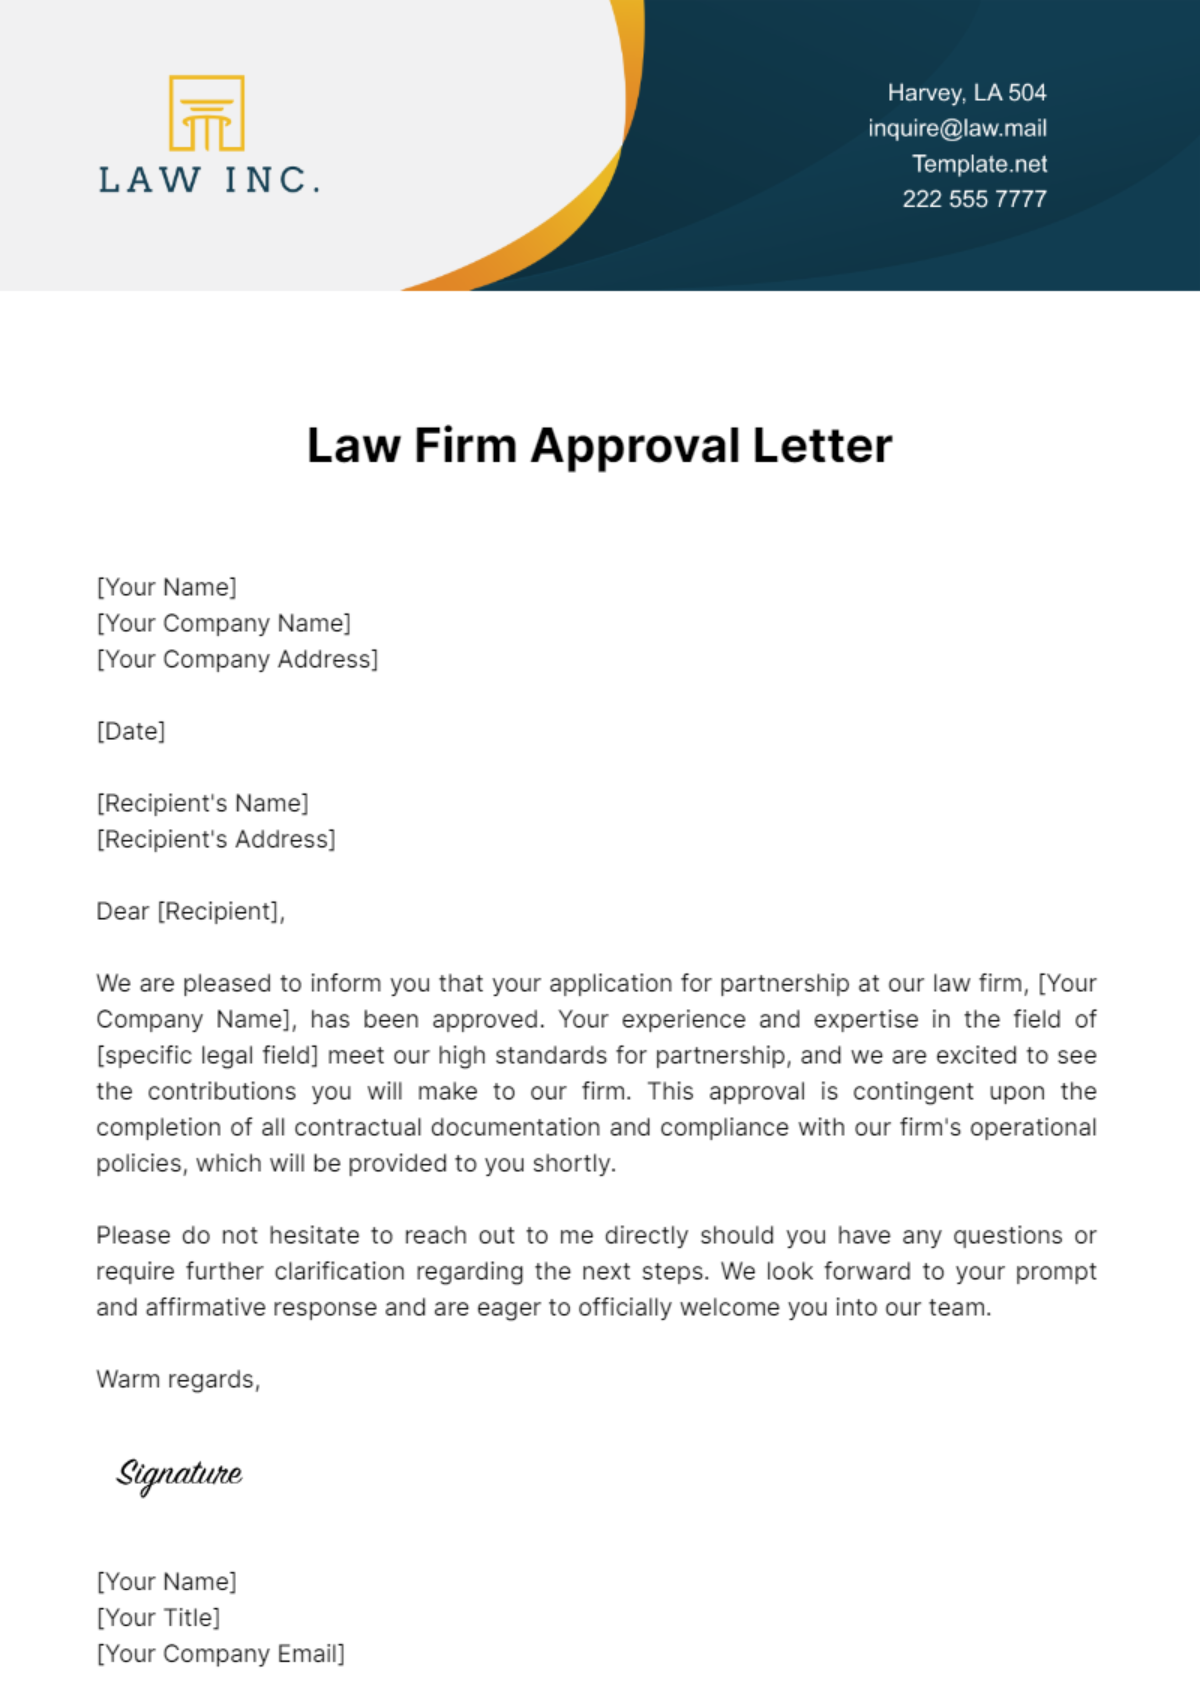 Law Firm Approval Letter Template